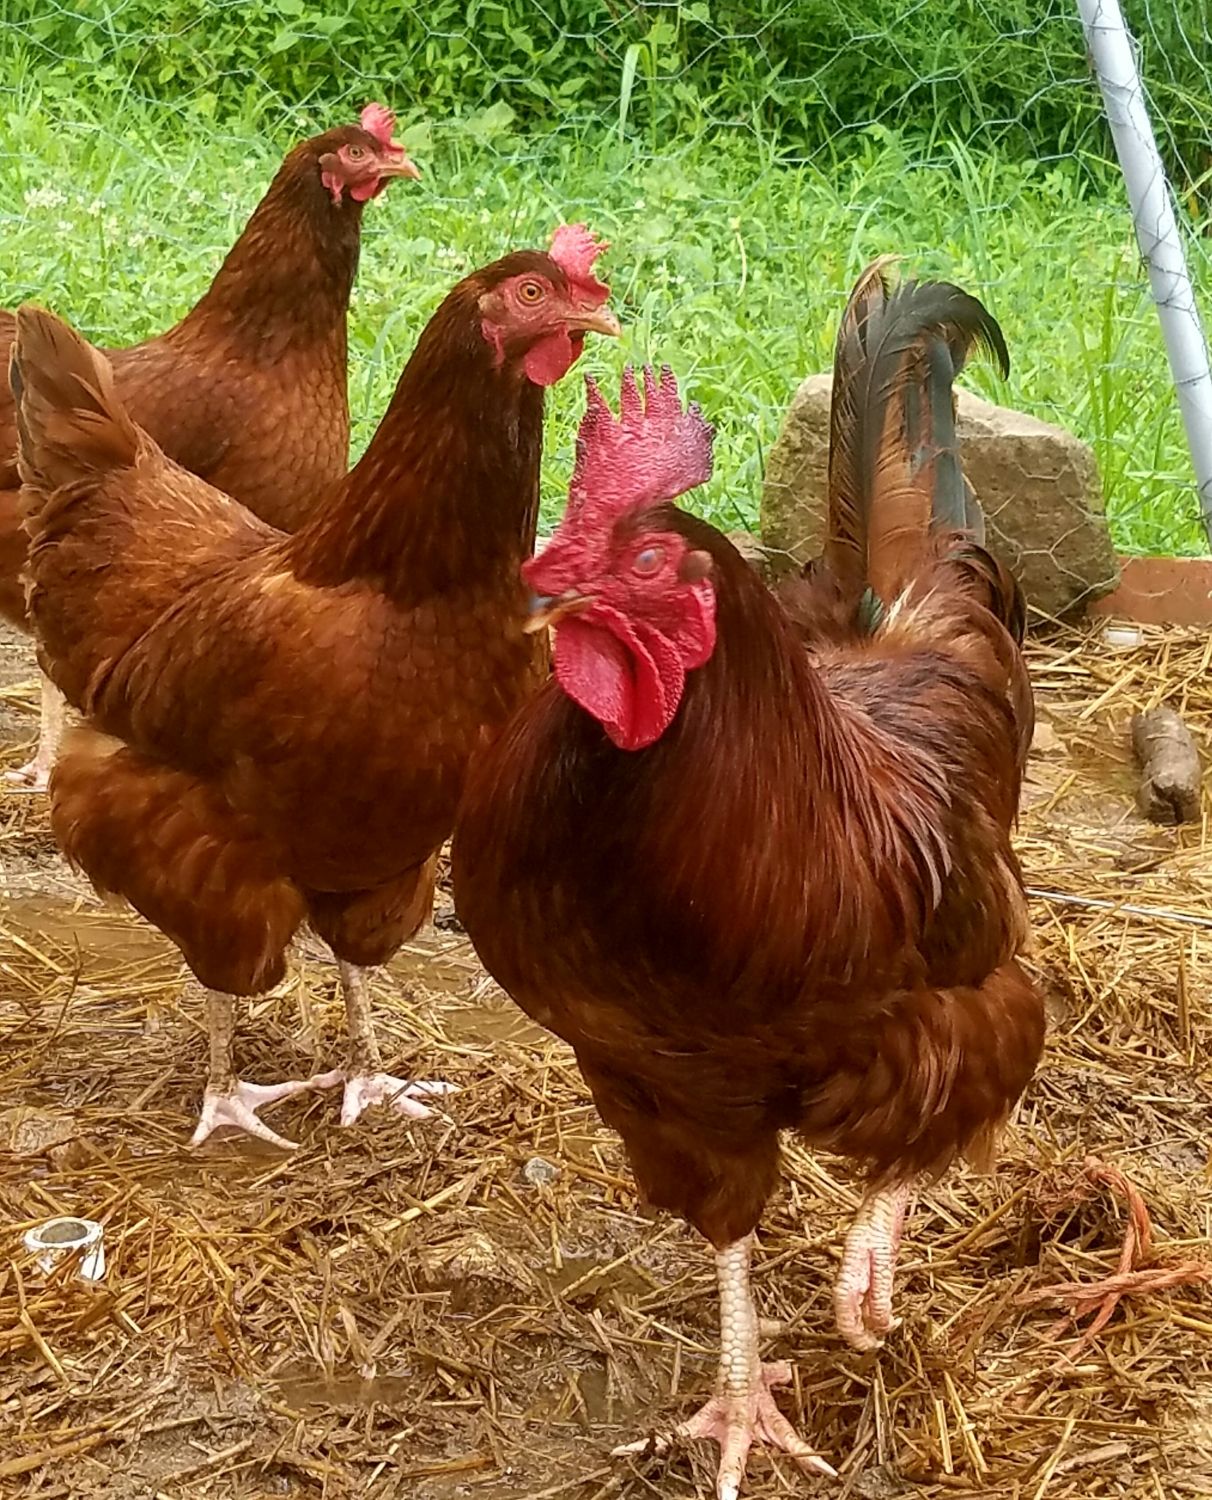 production red chicken eggs